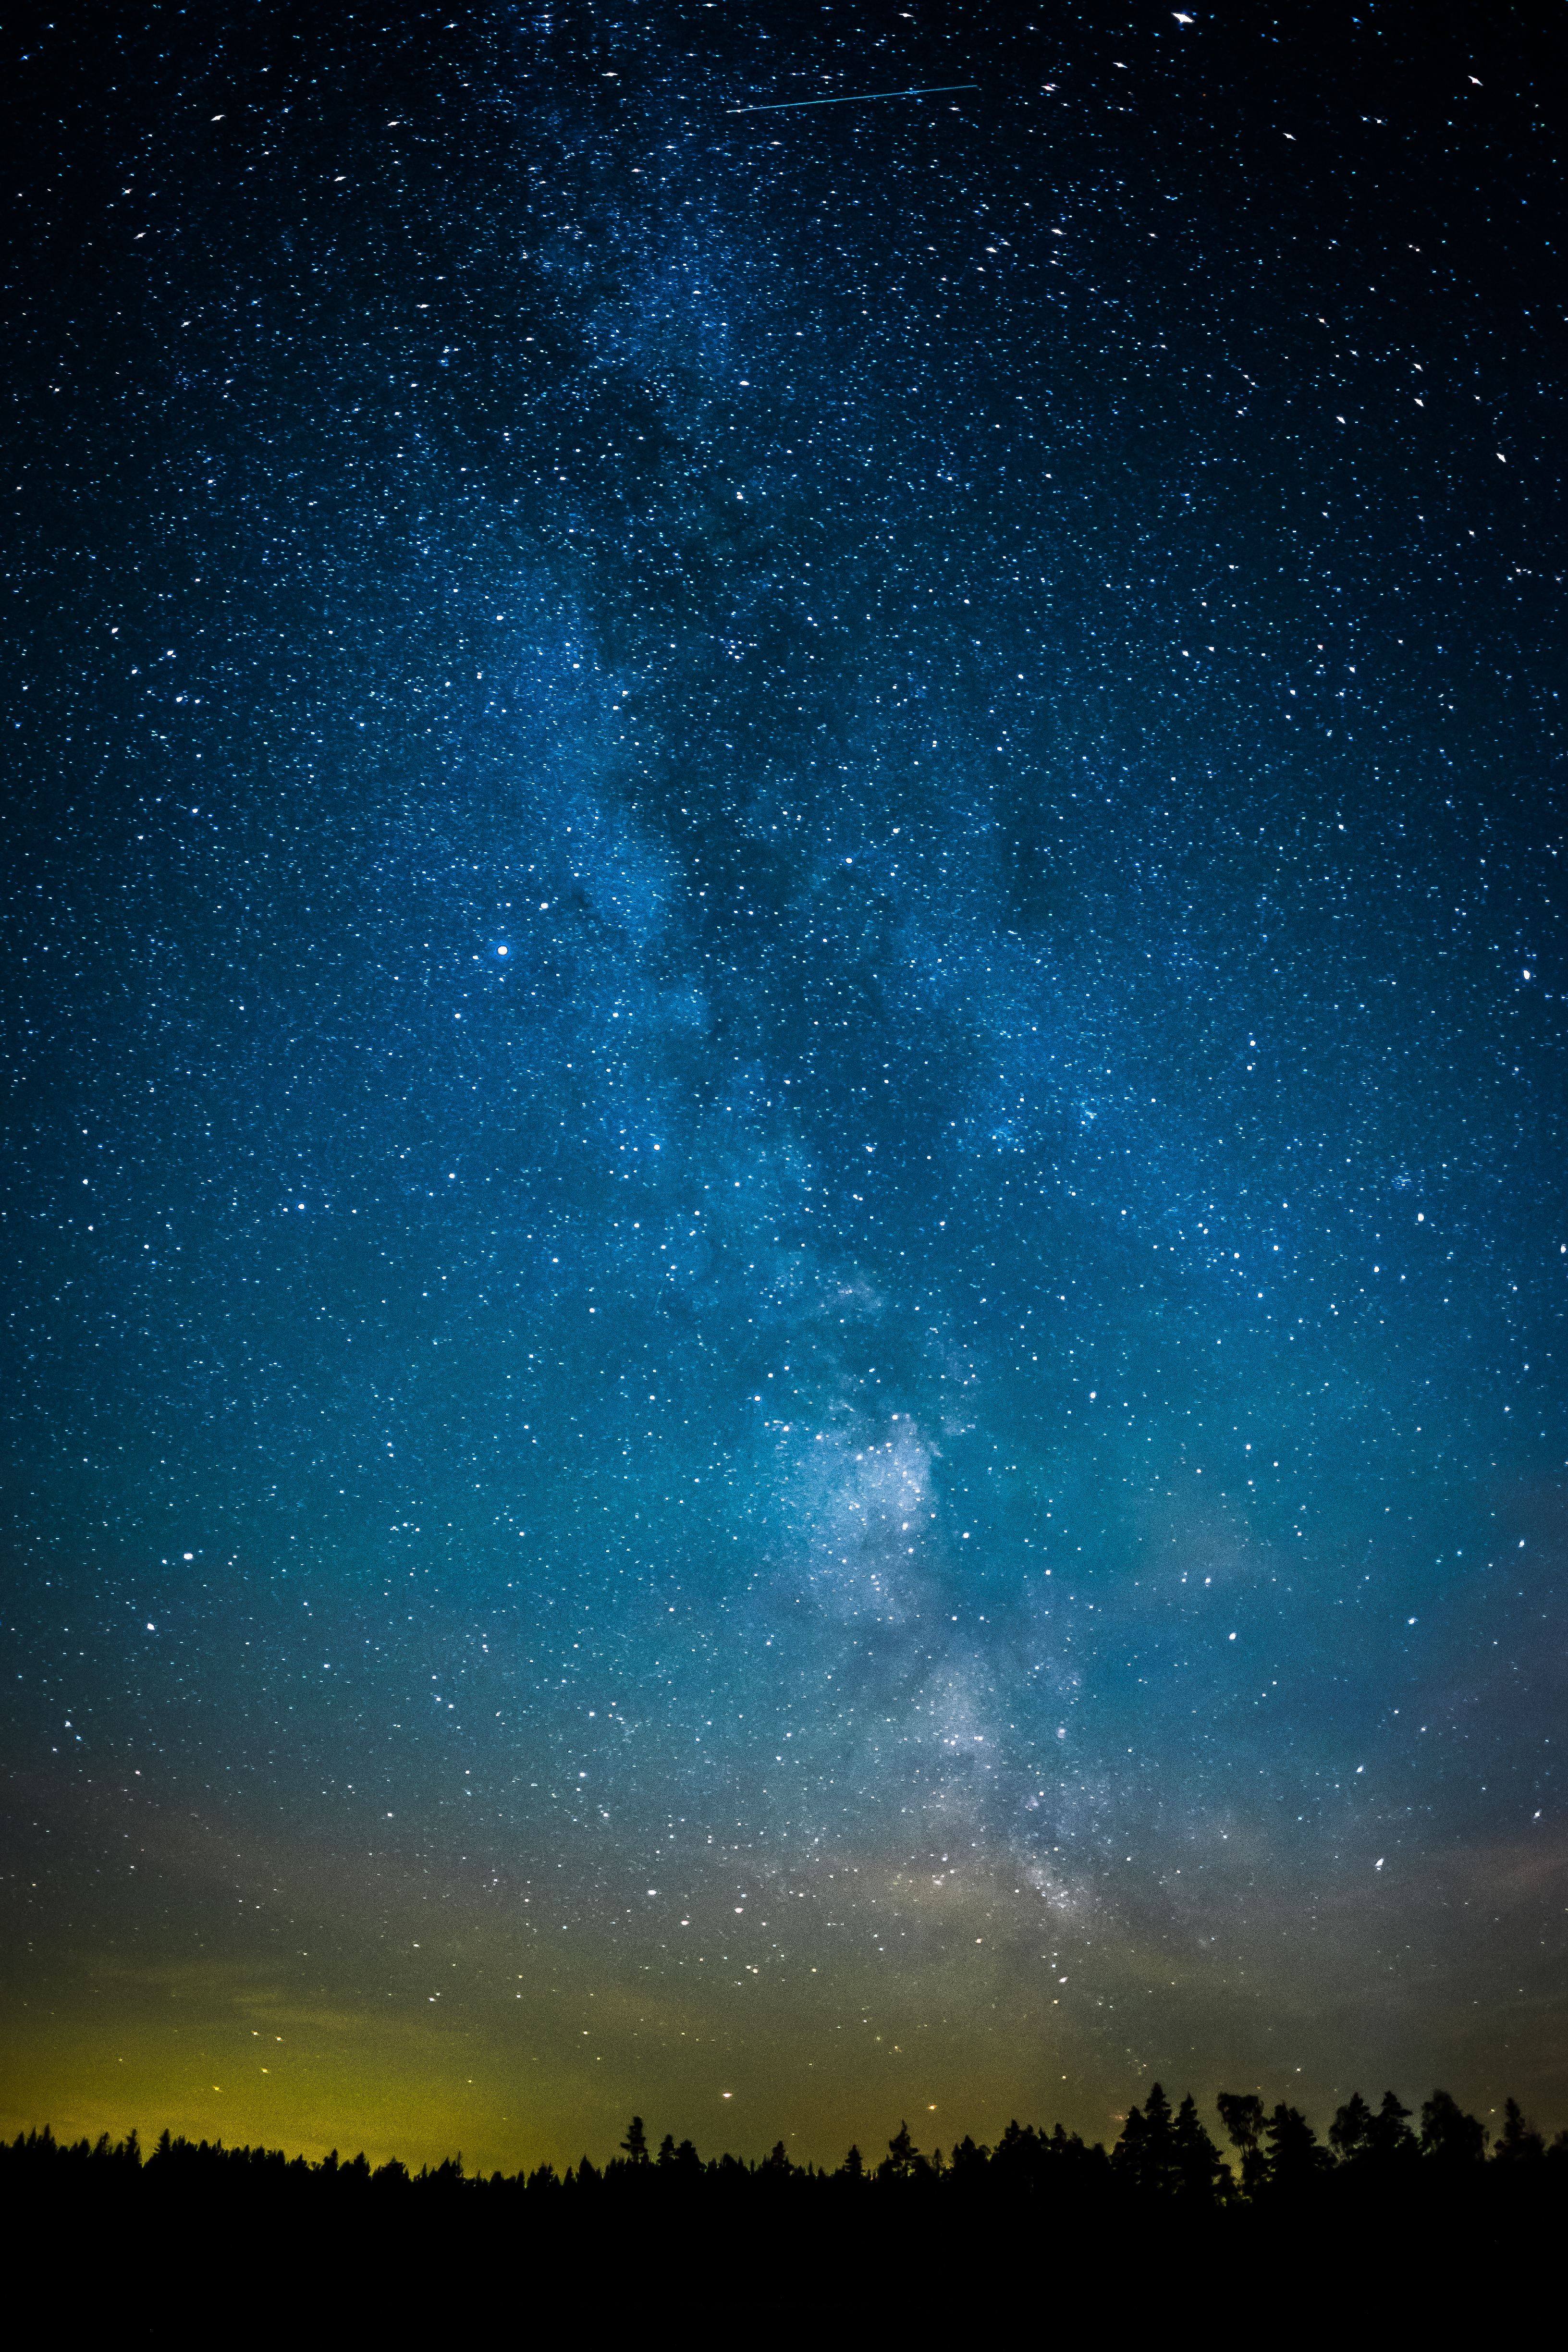 stars, universe, trees, dark, starry sky wallpapers for tablet